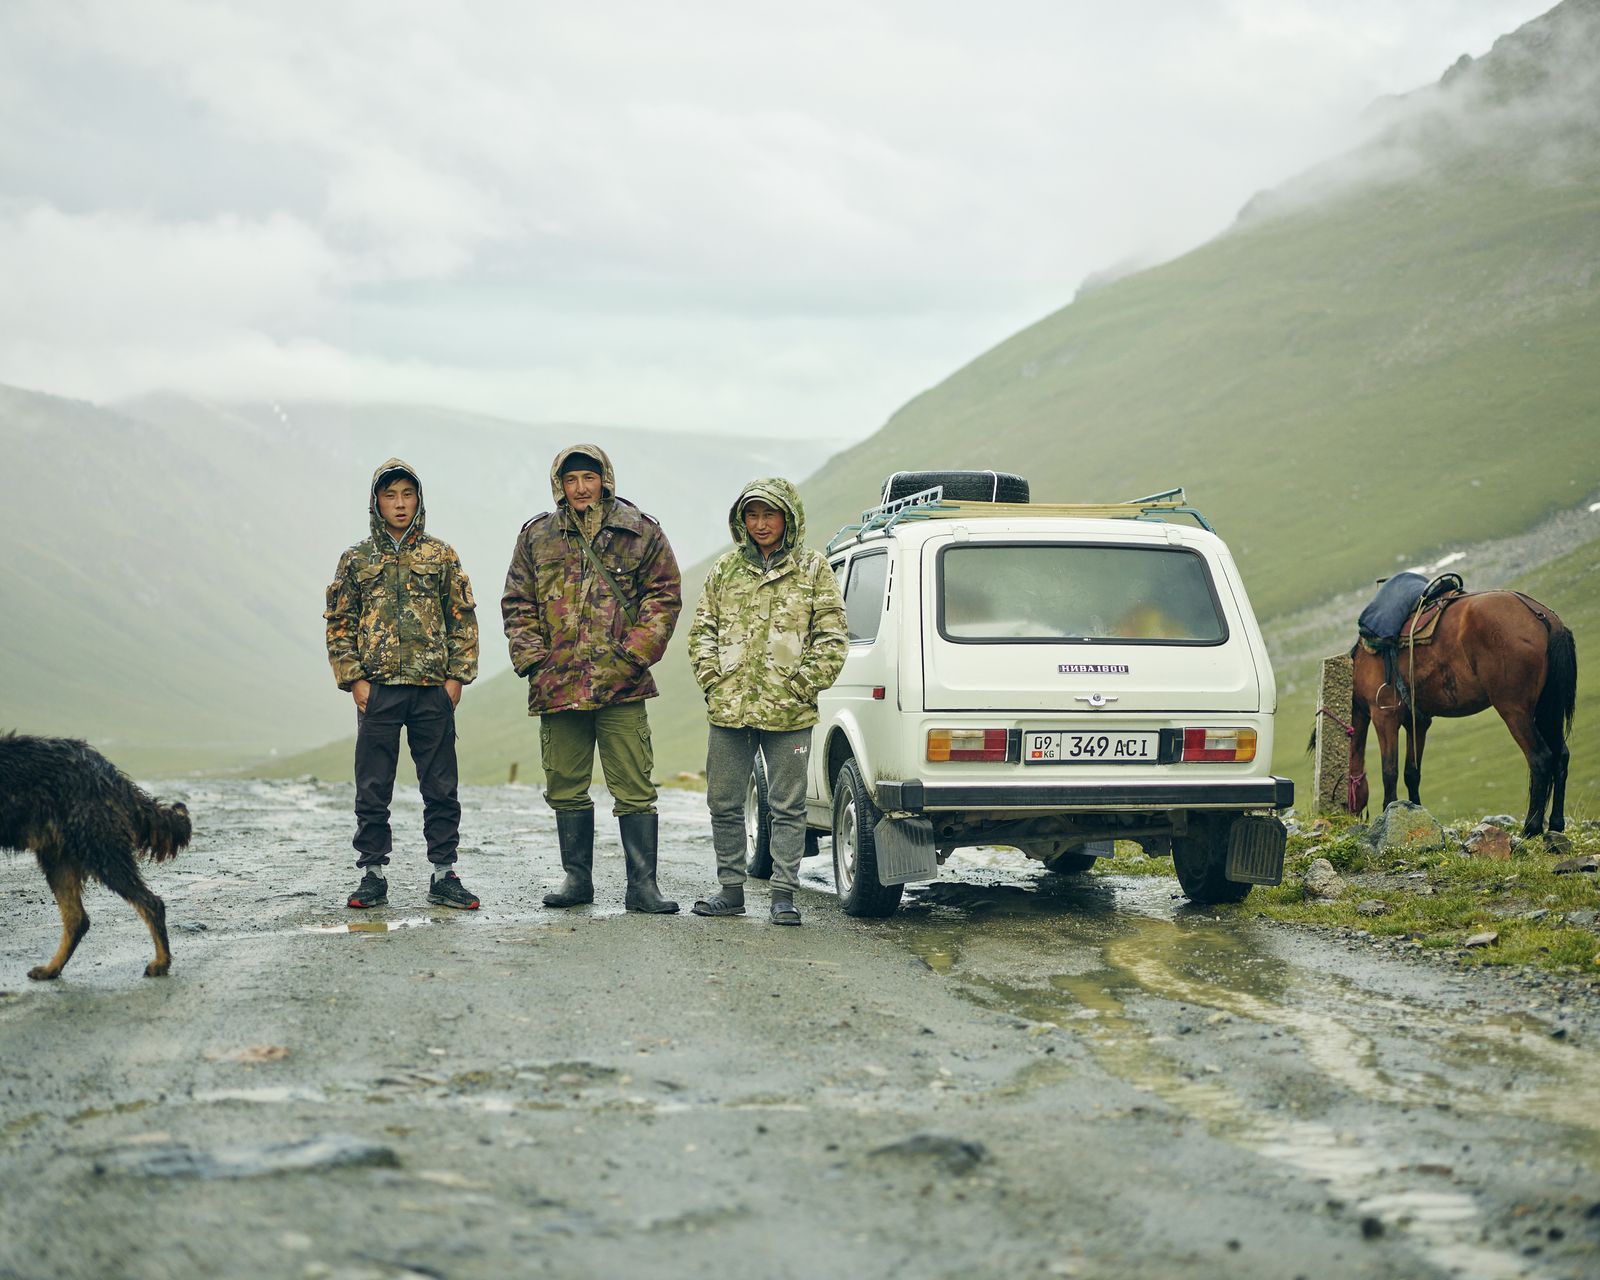 © Louise Amelie - Image from the Missing Member - Kyrgyzstan. A Country On The Move photography project